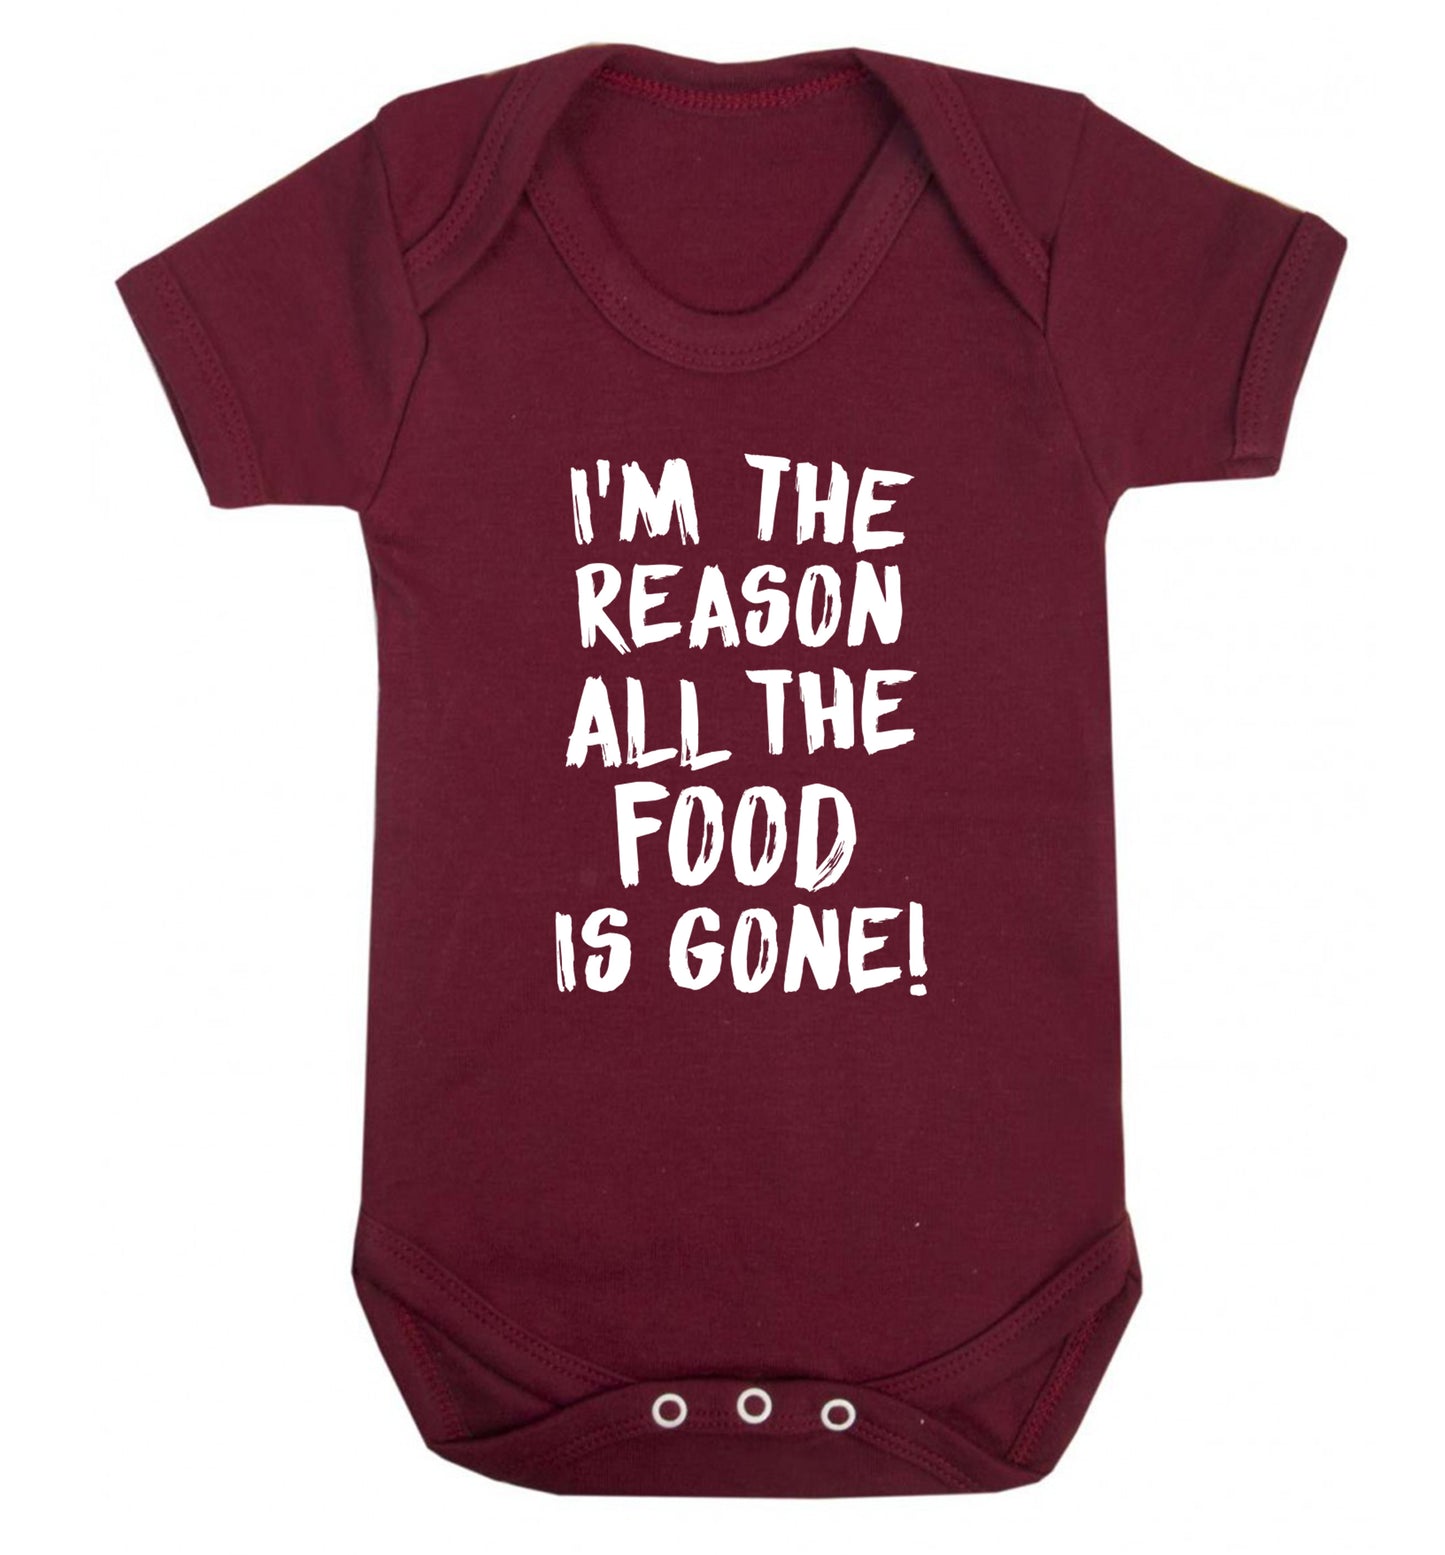 I'm the reason why all the food is gone Baby Vest maroon 18-24 months